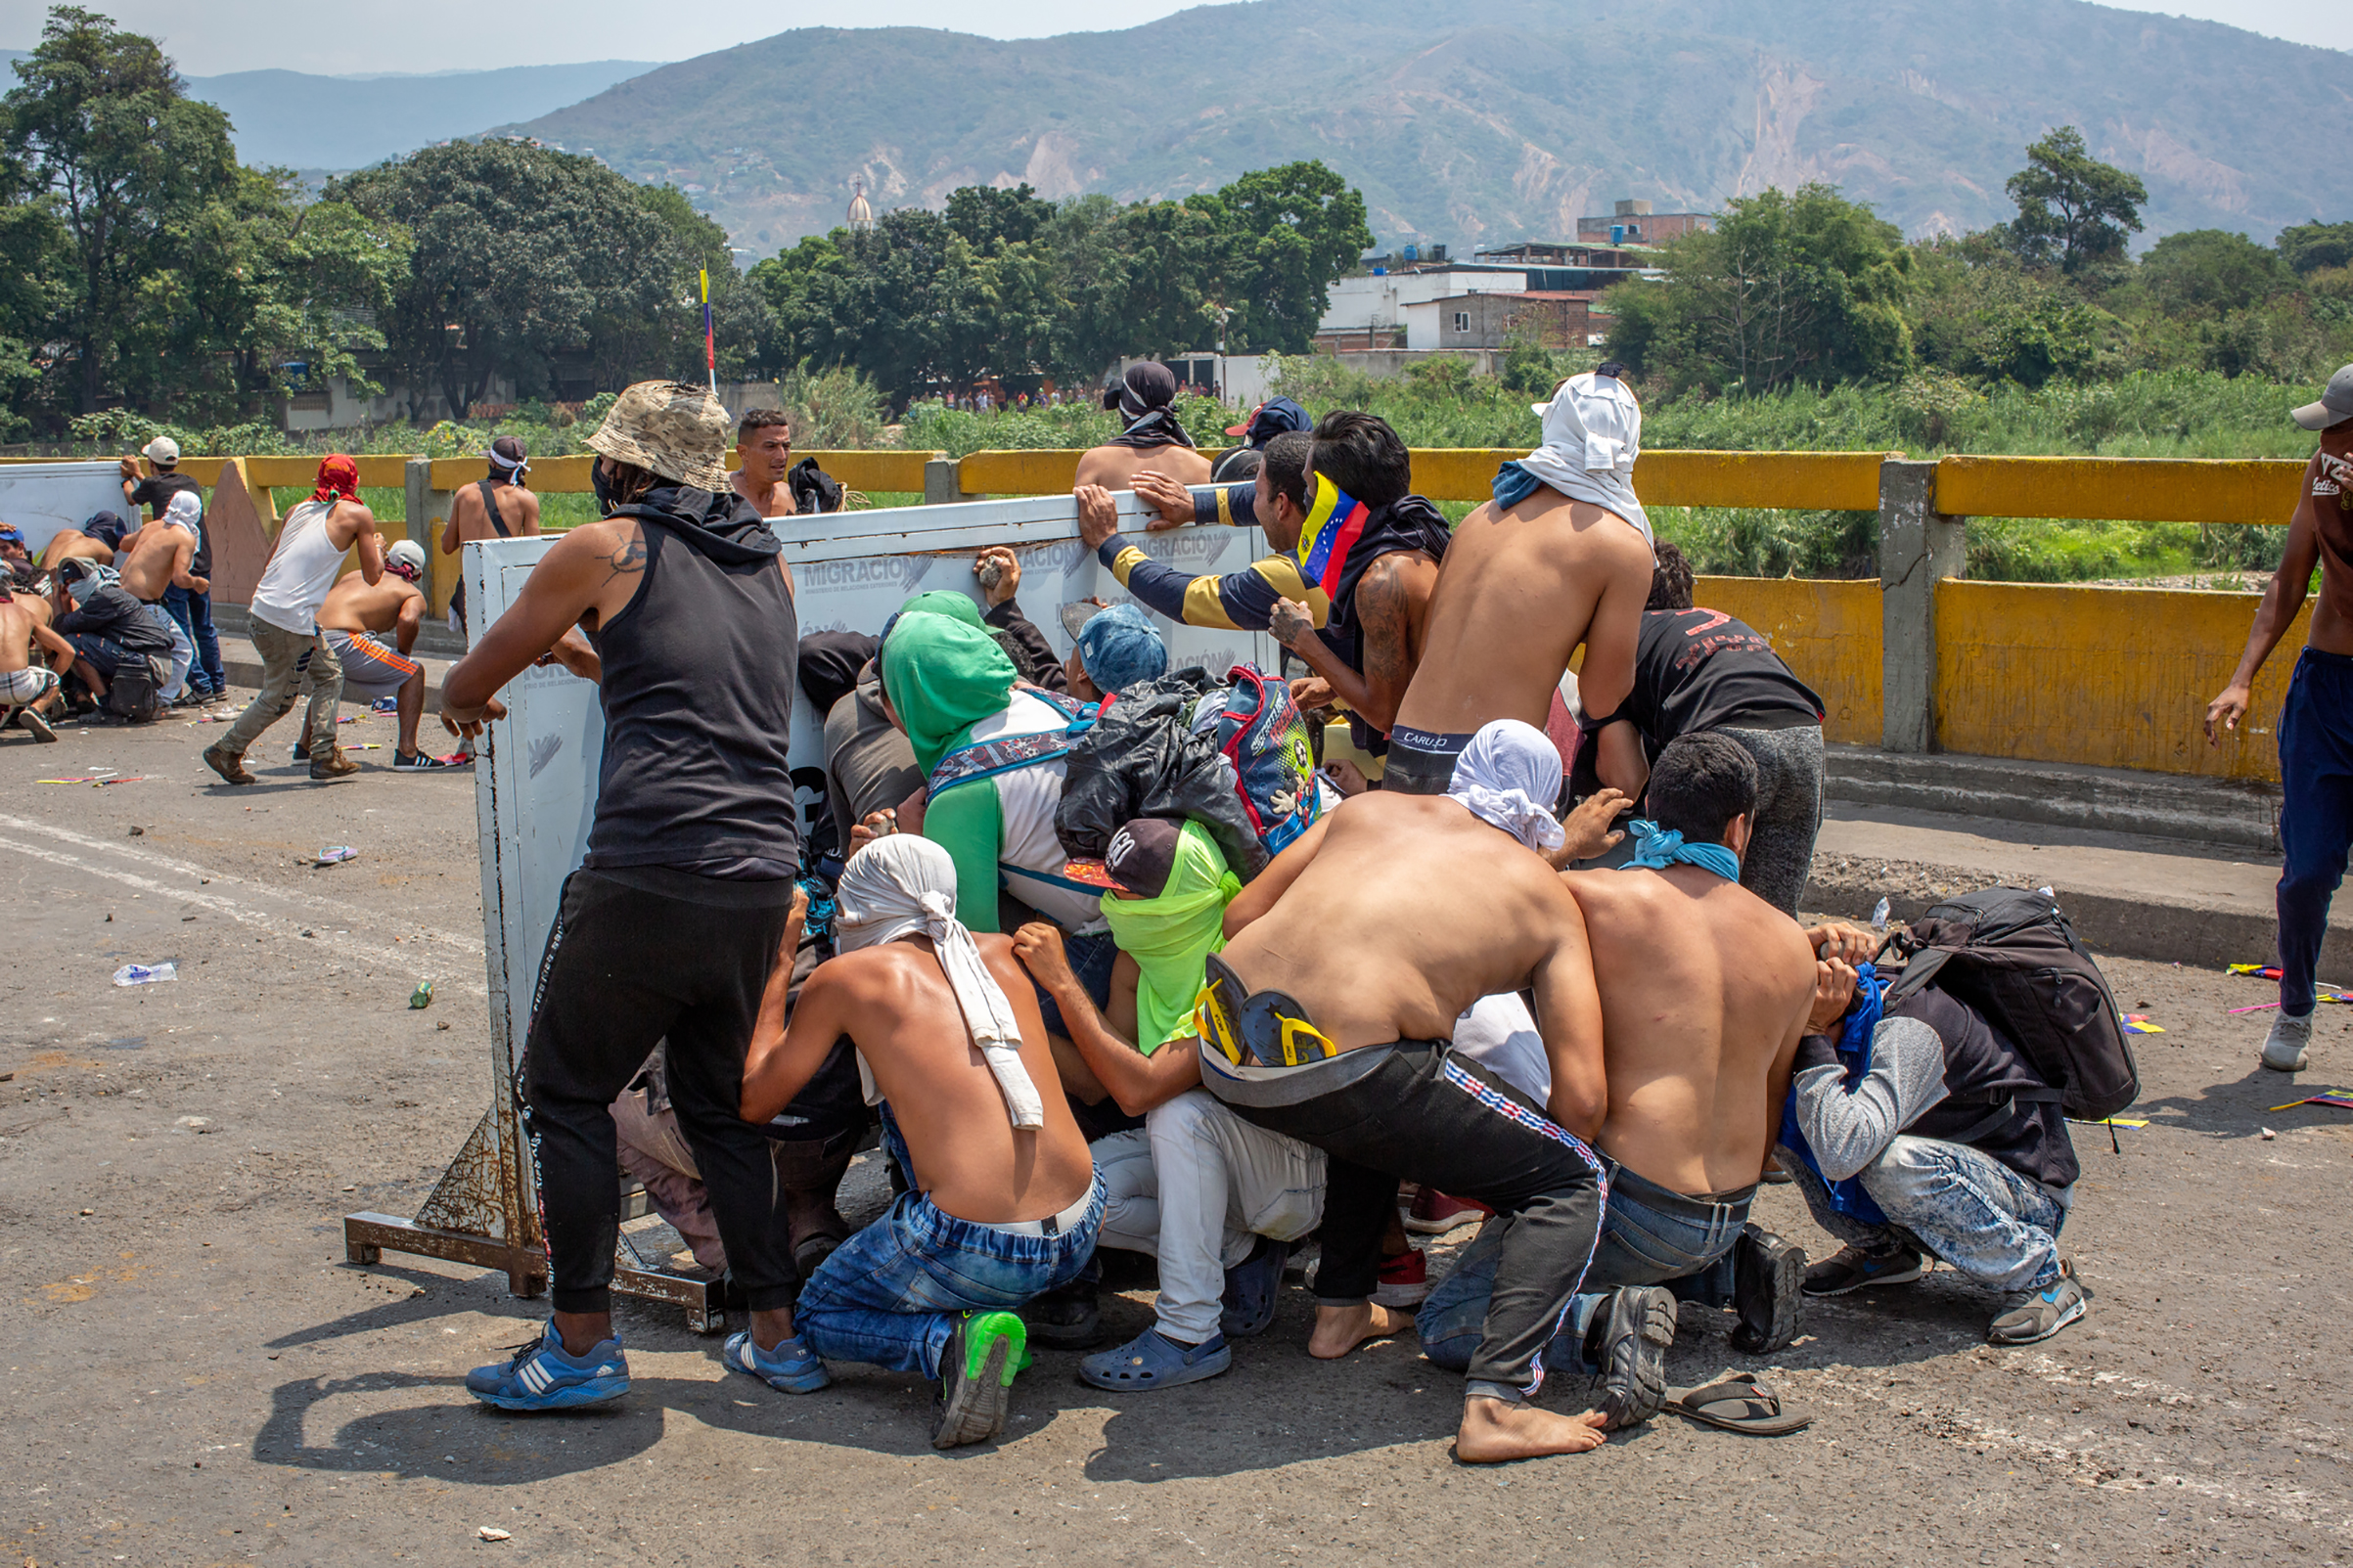 A group of demonstrators take cover during a clash with Venezuelan national police officers on the bridge. (Photograph by TIME)